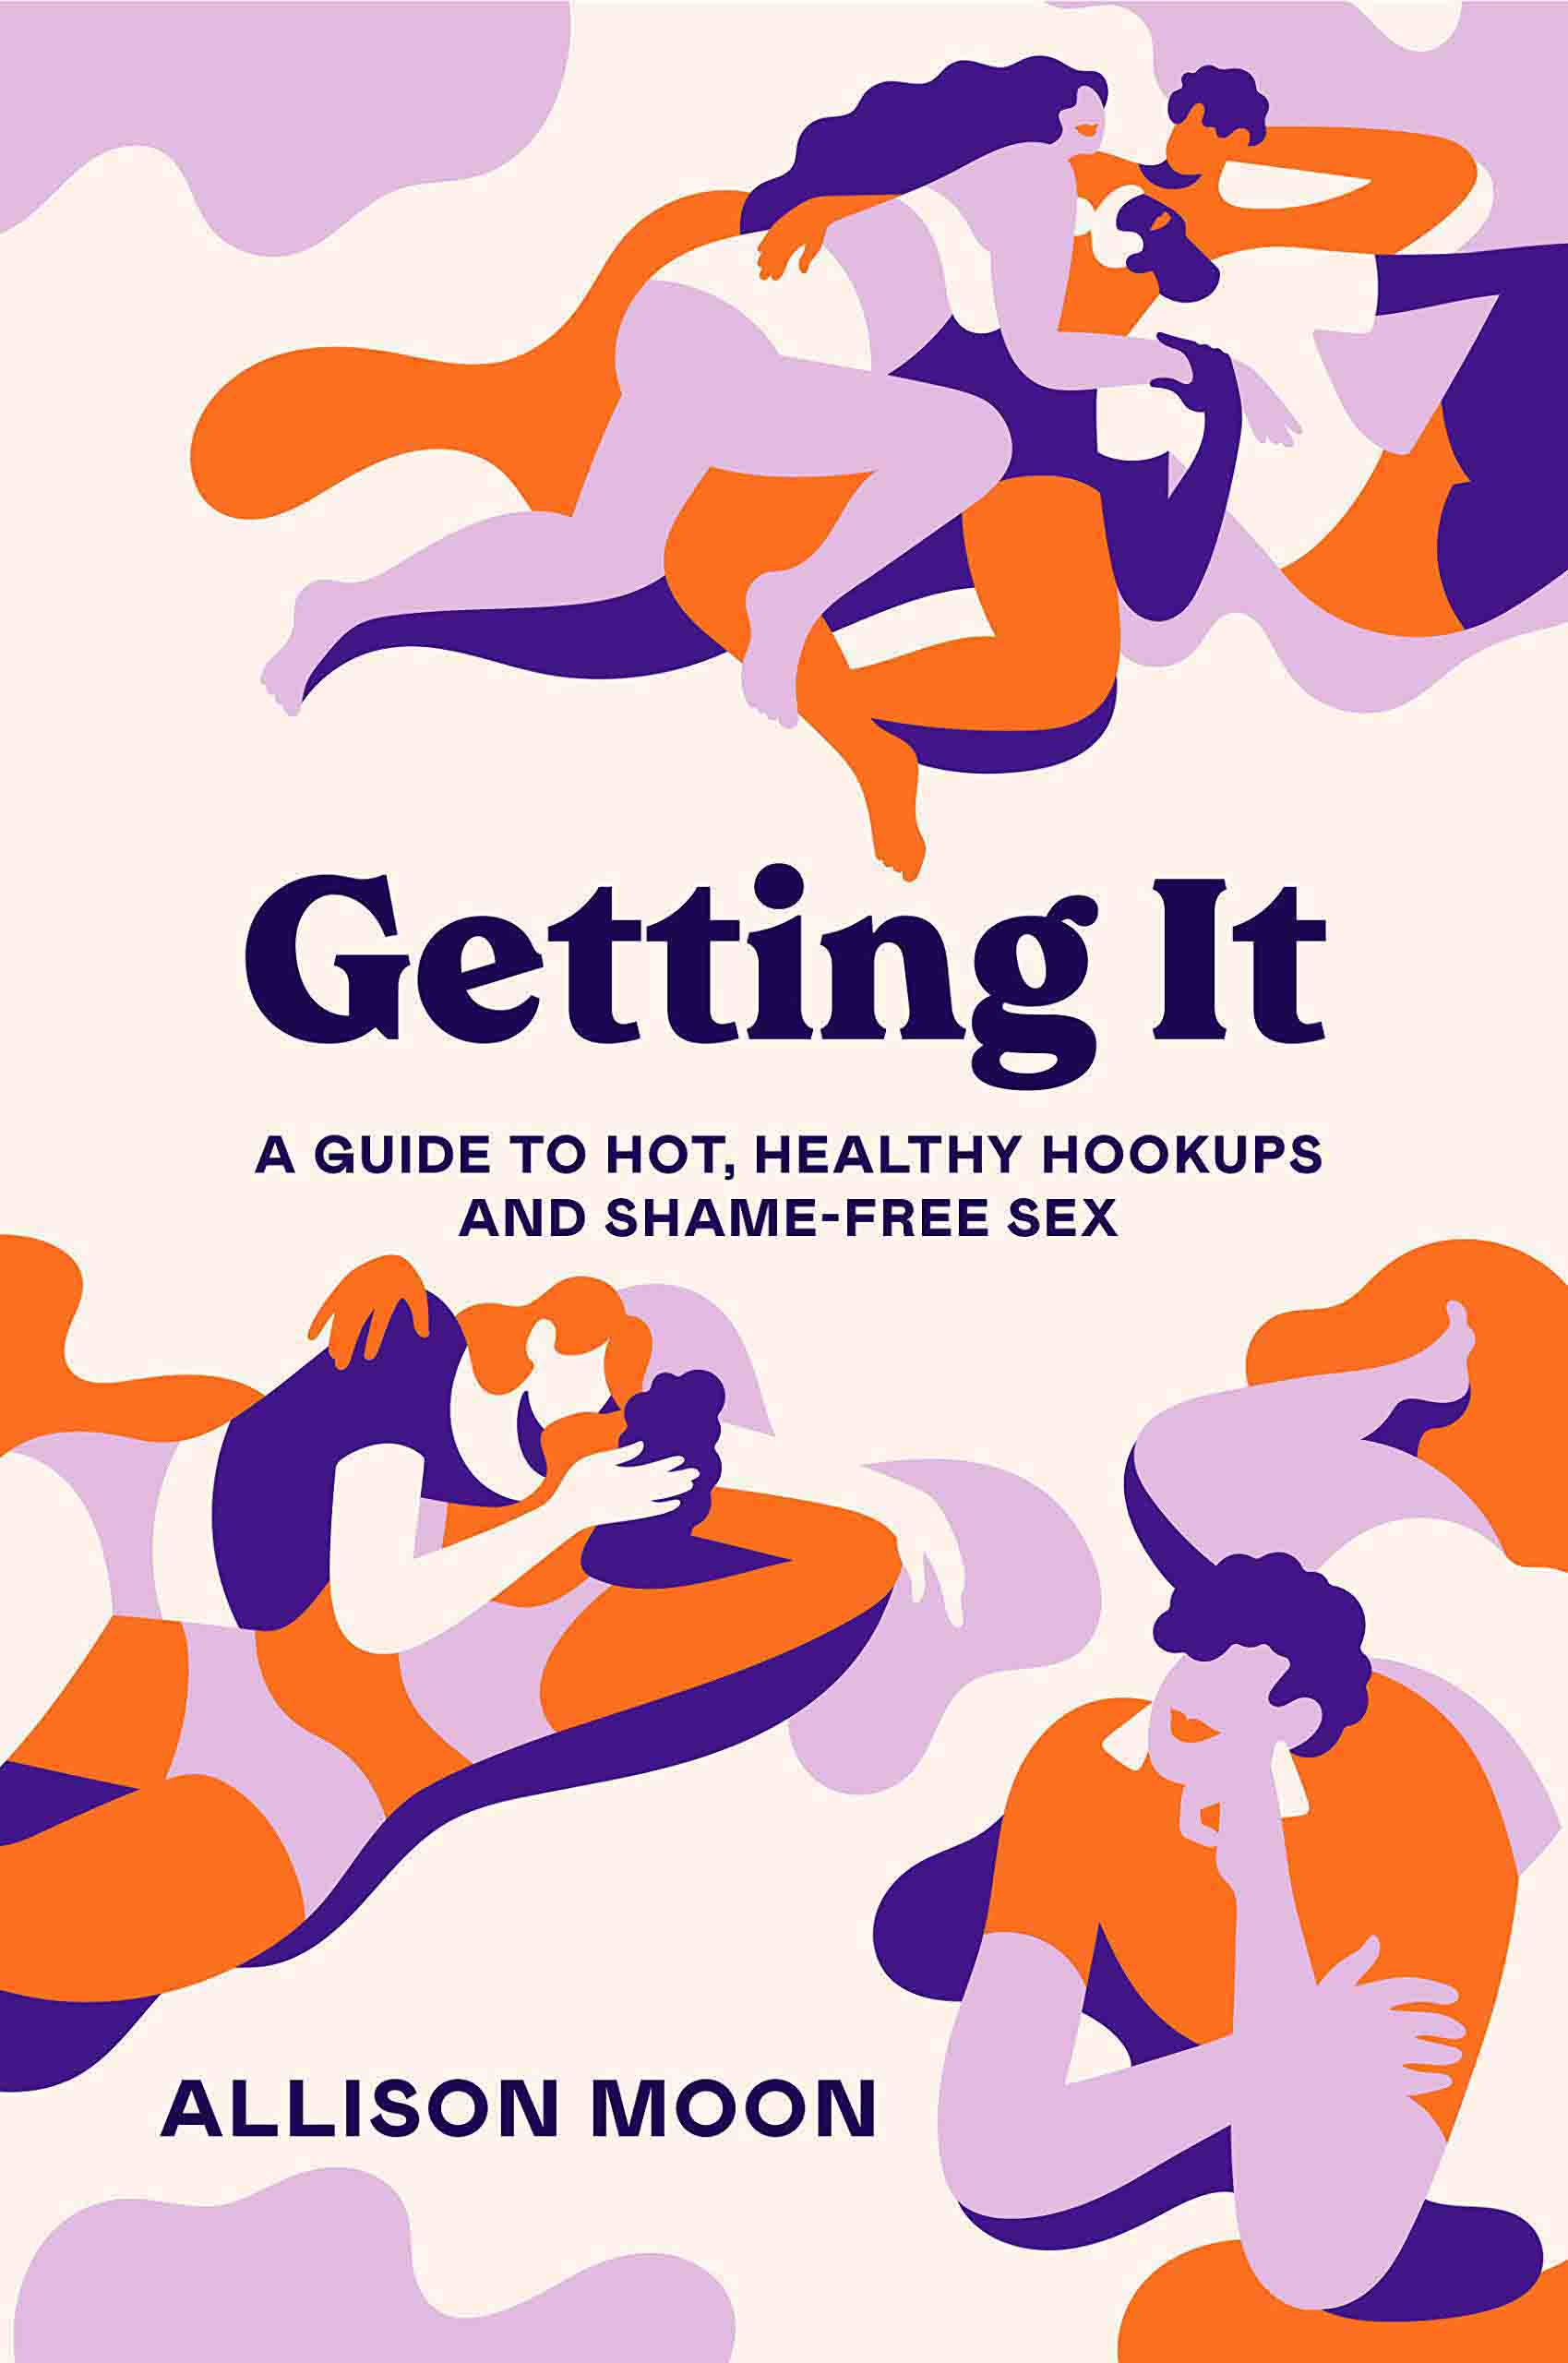 The front cover of Getting It: A Guide to Hot, Healthy Hookups and Shame-Free Sex.